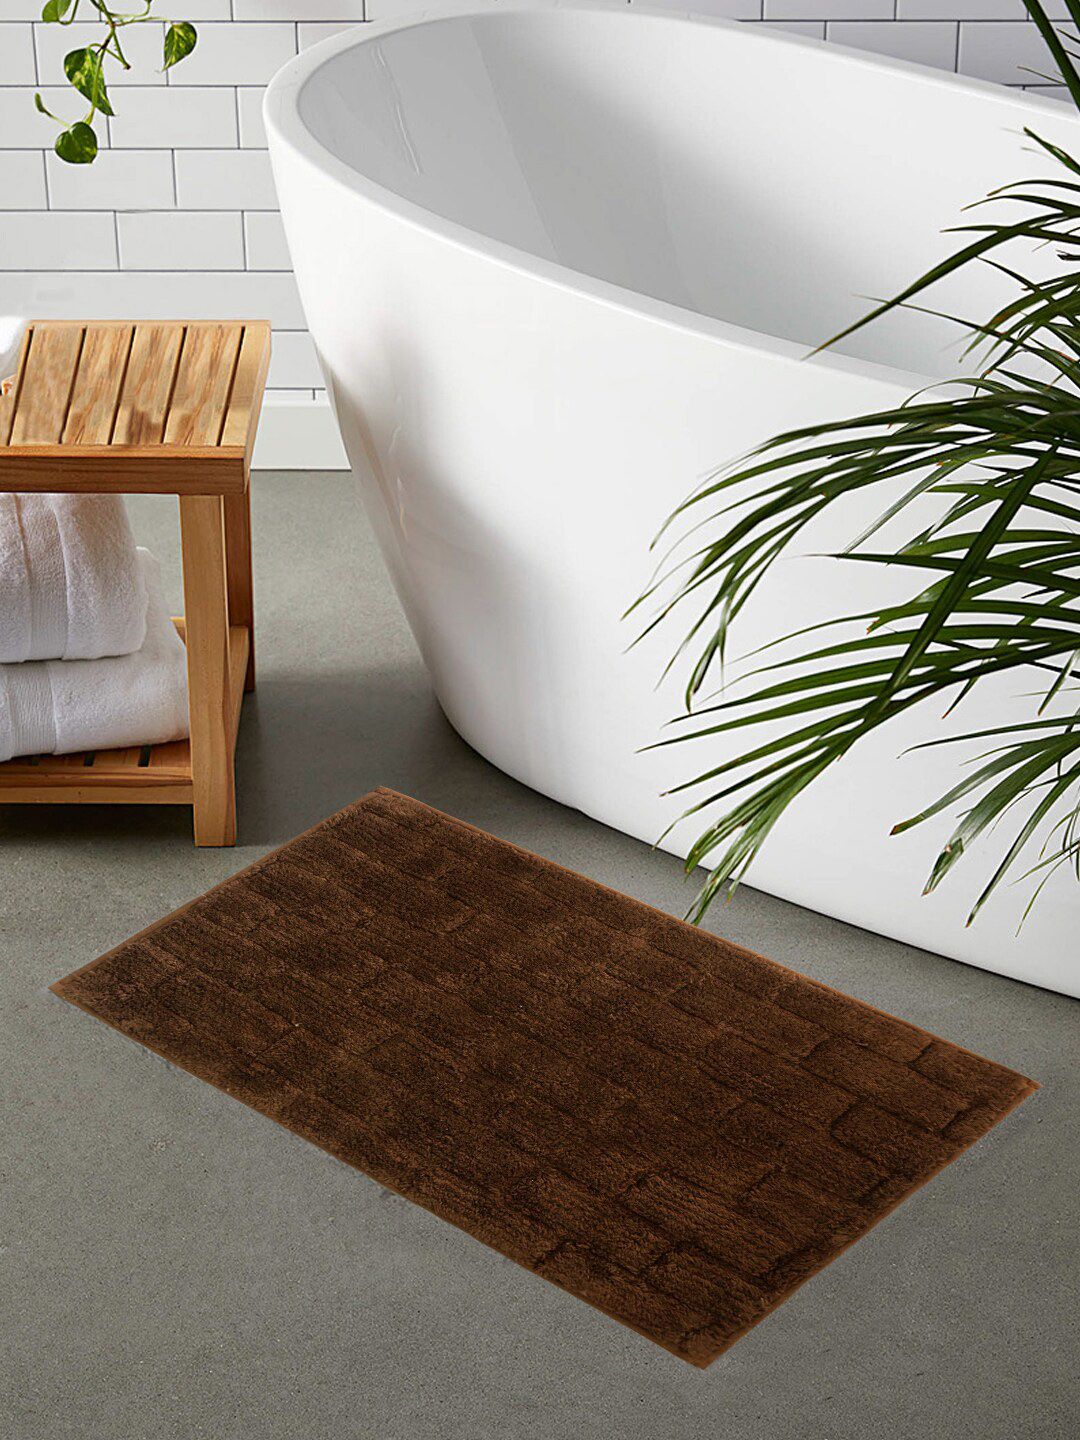 Shresmo Brown Solid 2200 GSM Cotton Bath Rug Price in India